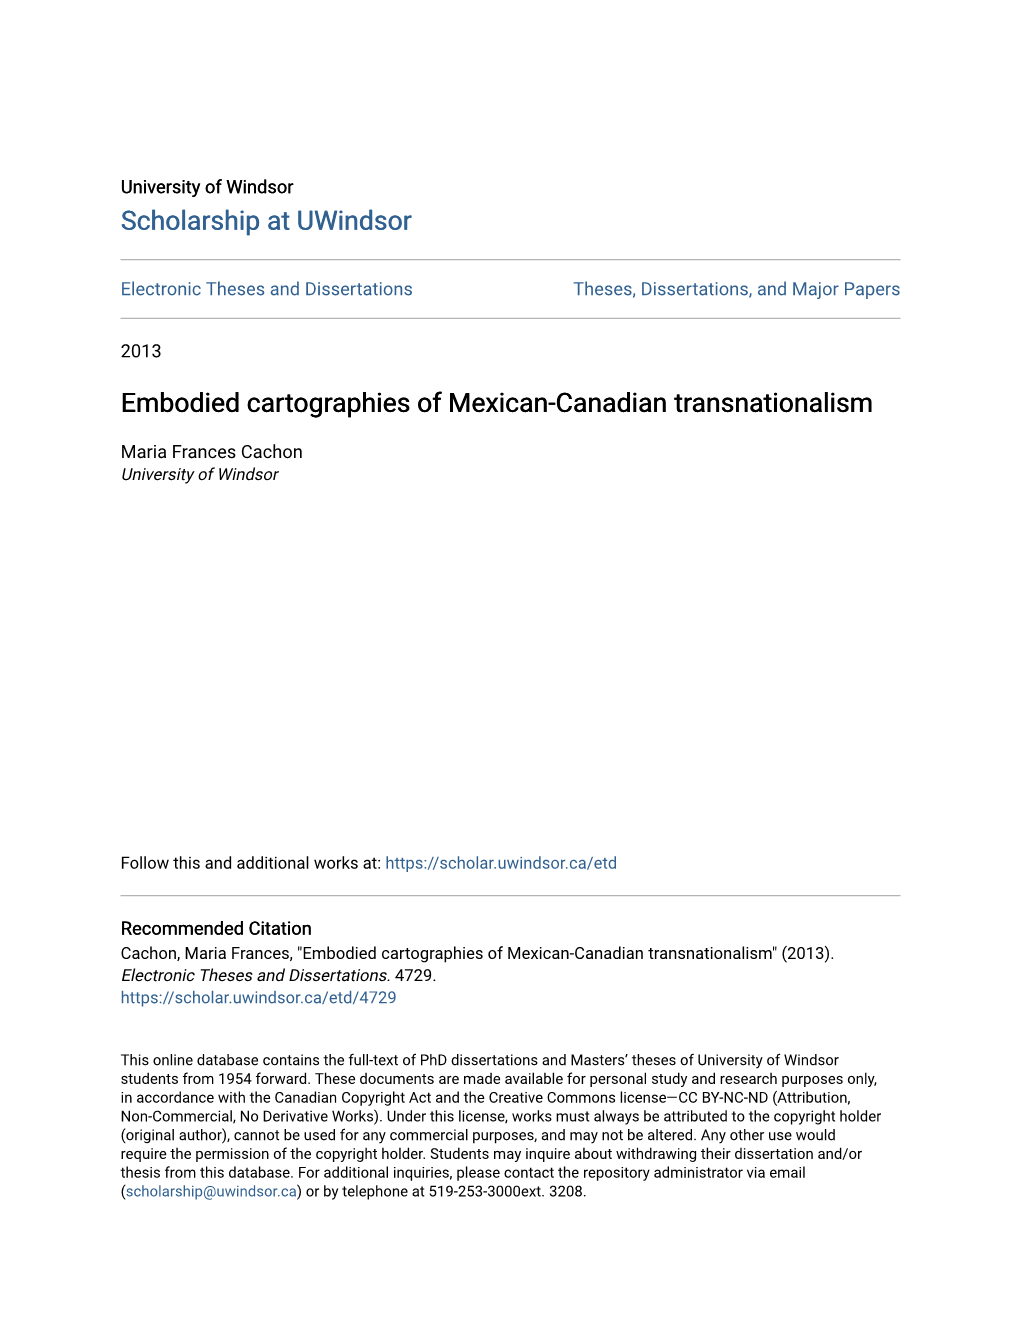 Embodied Cartographies of Mexican-Canadian Transnationalism